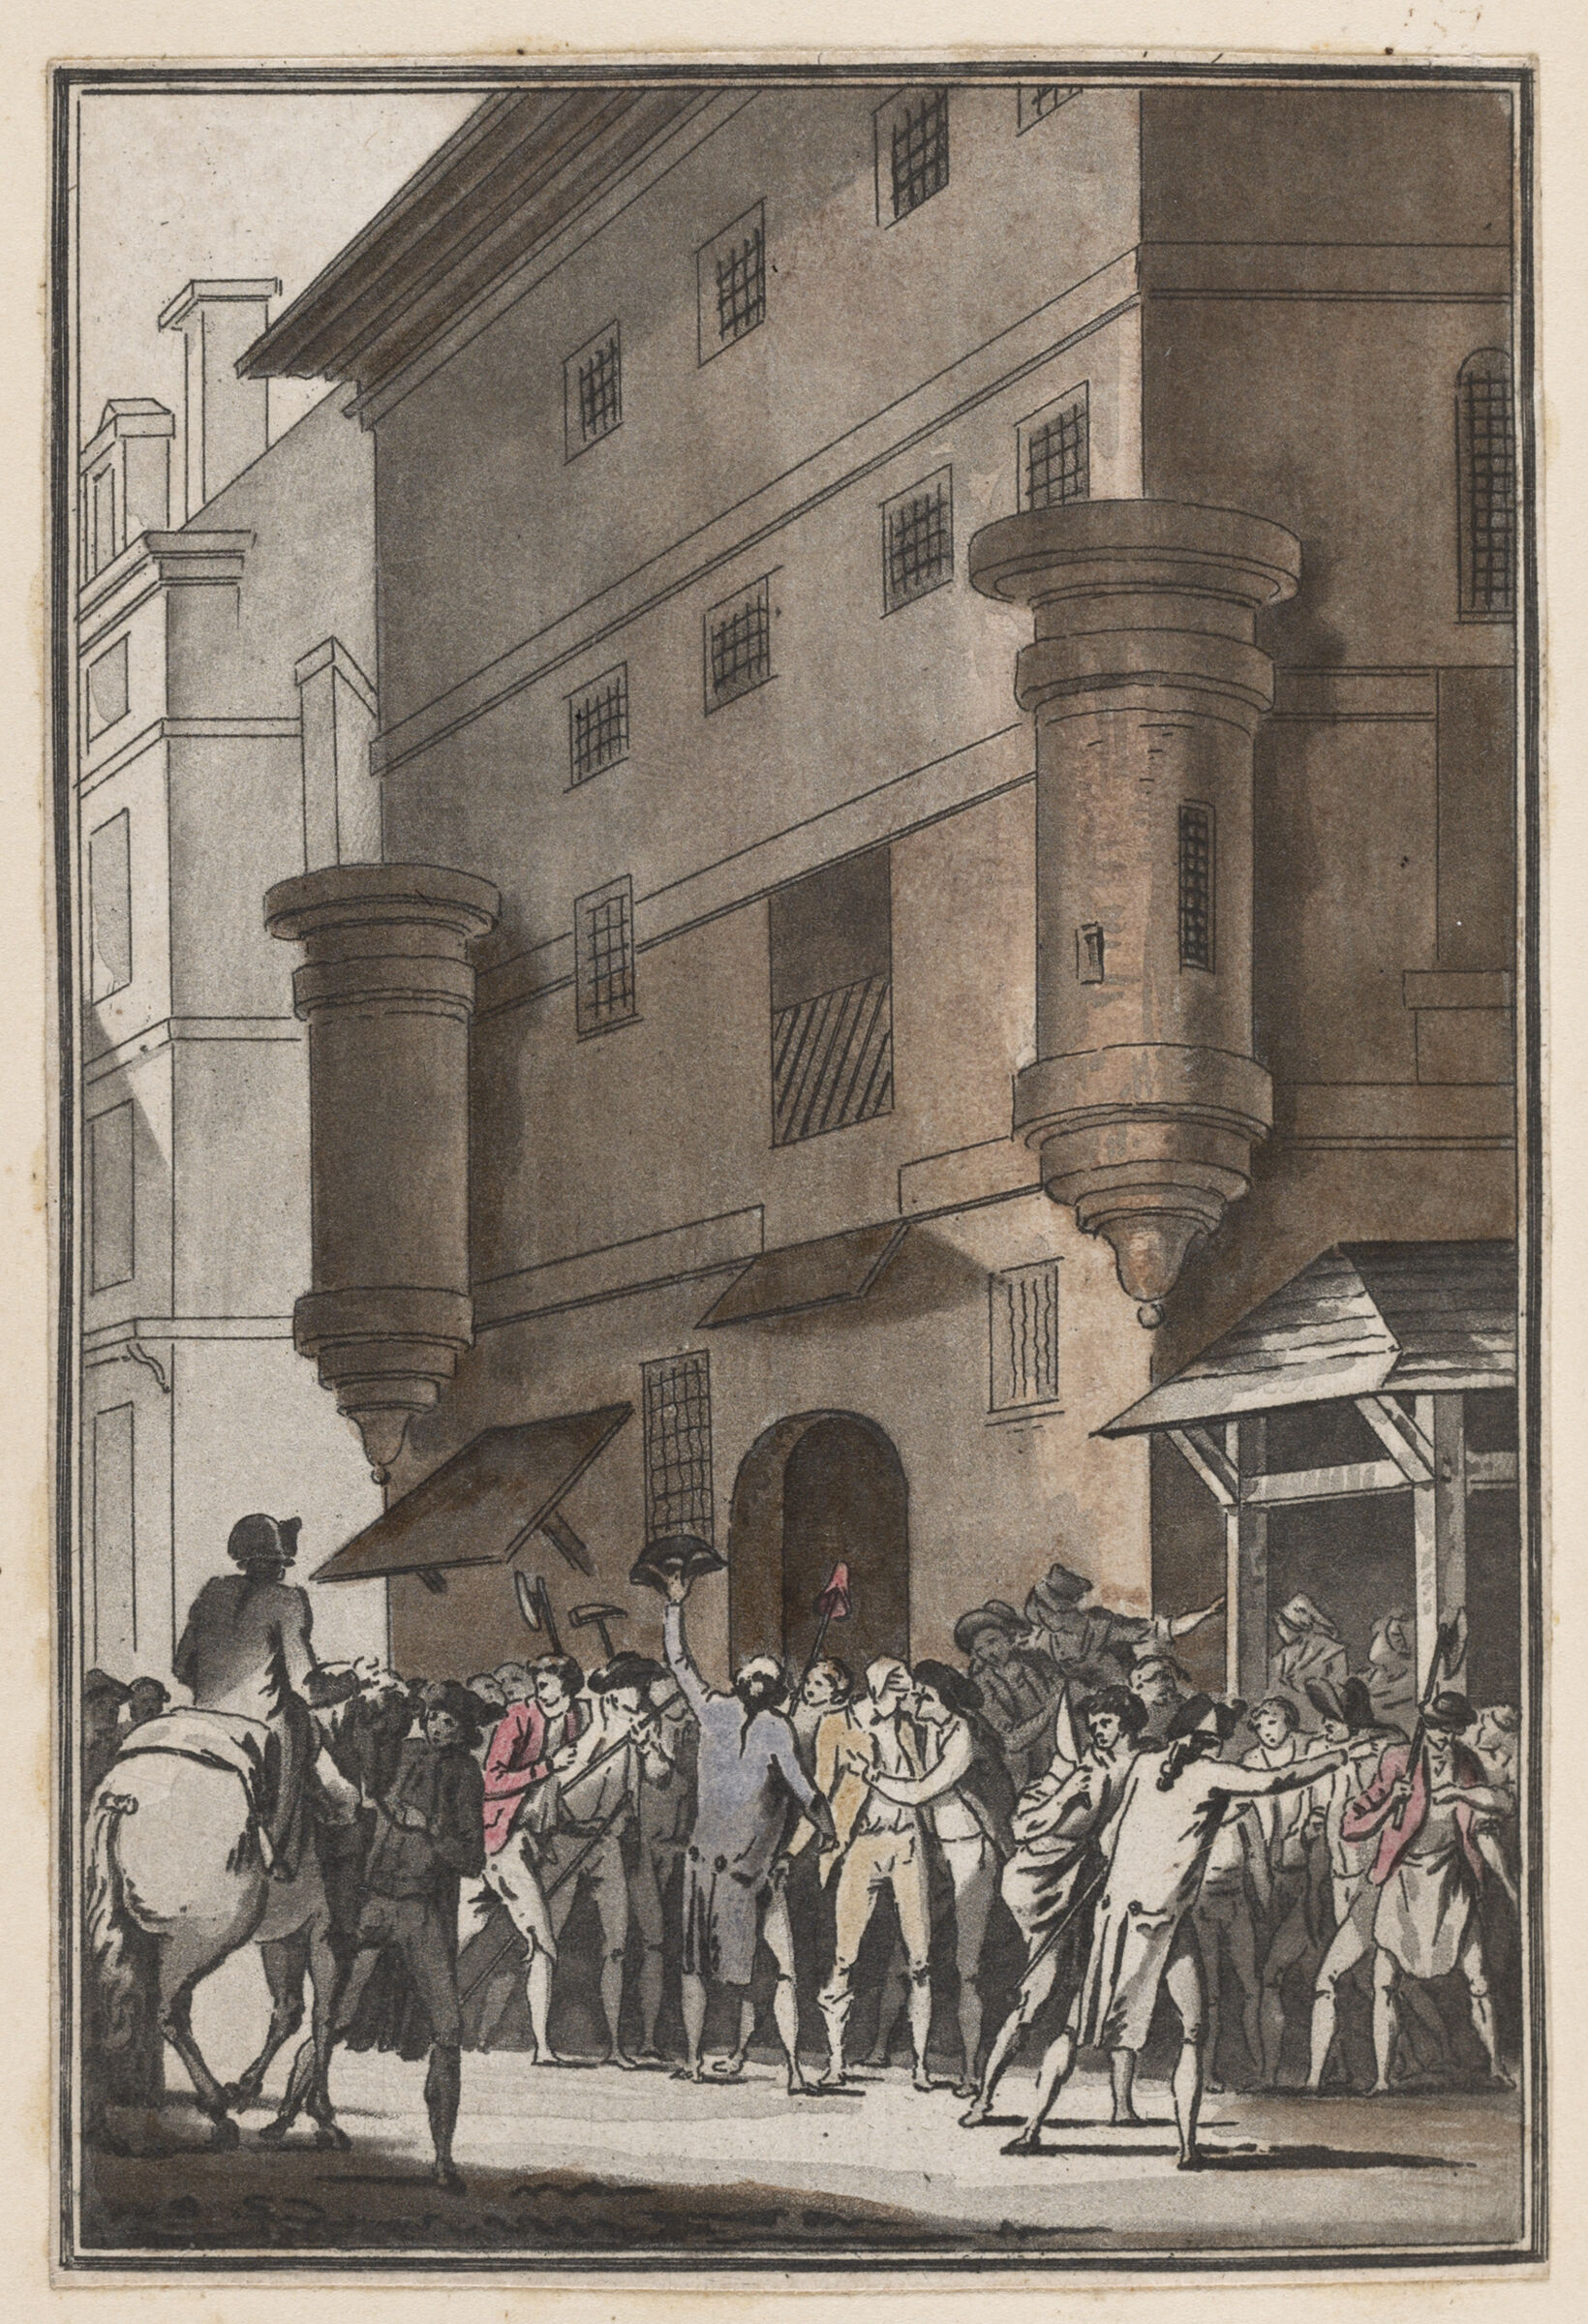 The People Force The Doors Of The Abbaye St.-Germain Prison And Free The Prisonners (30 June 1789)